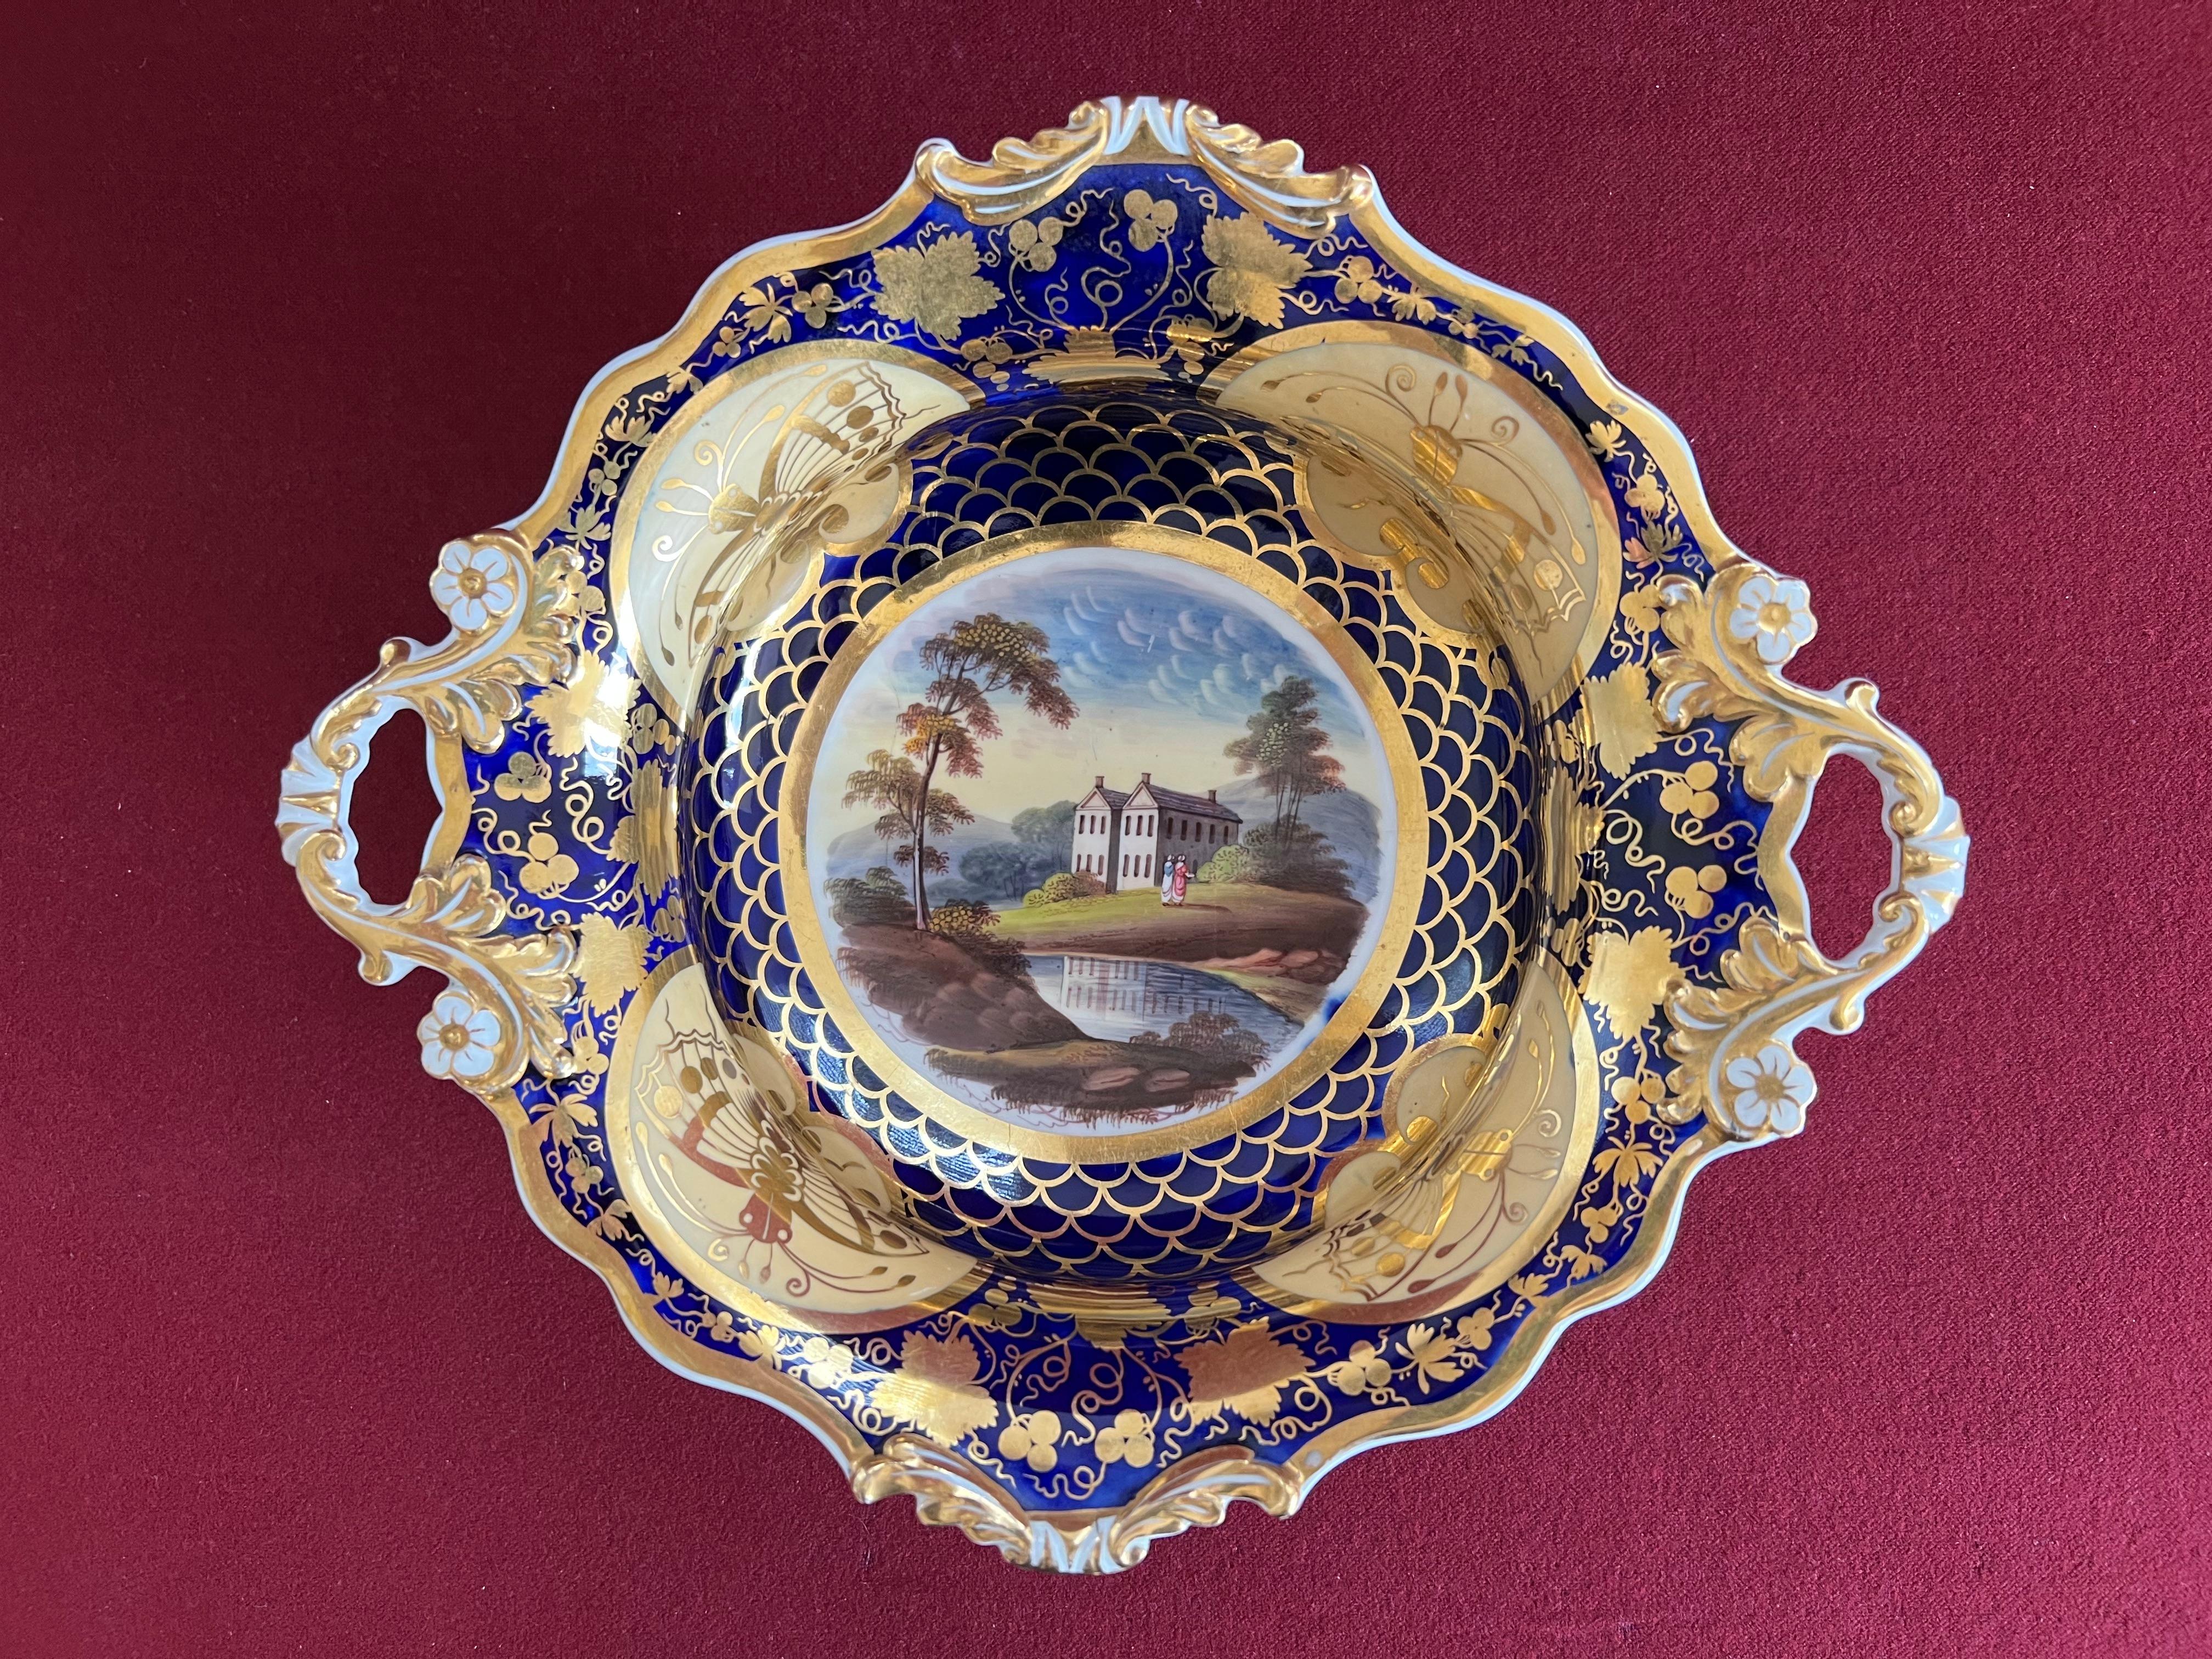 A finely decorated John & William Ridgway porcelain dessert service in pattern 1045 c.1825. The central well of each piece decorated with the scene of ruins / a castle / a house or a cottage in a landscape setting, with a dark underglaze blue ground